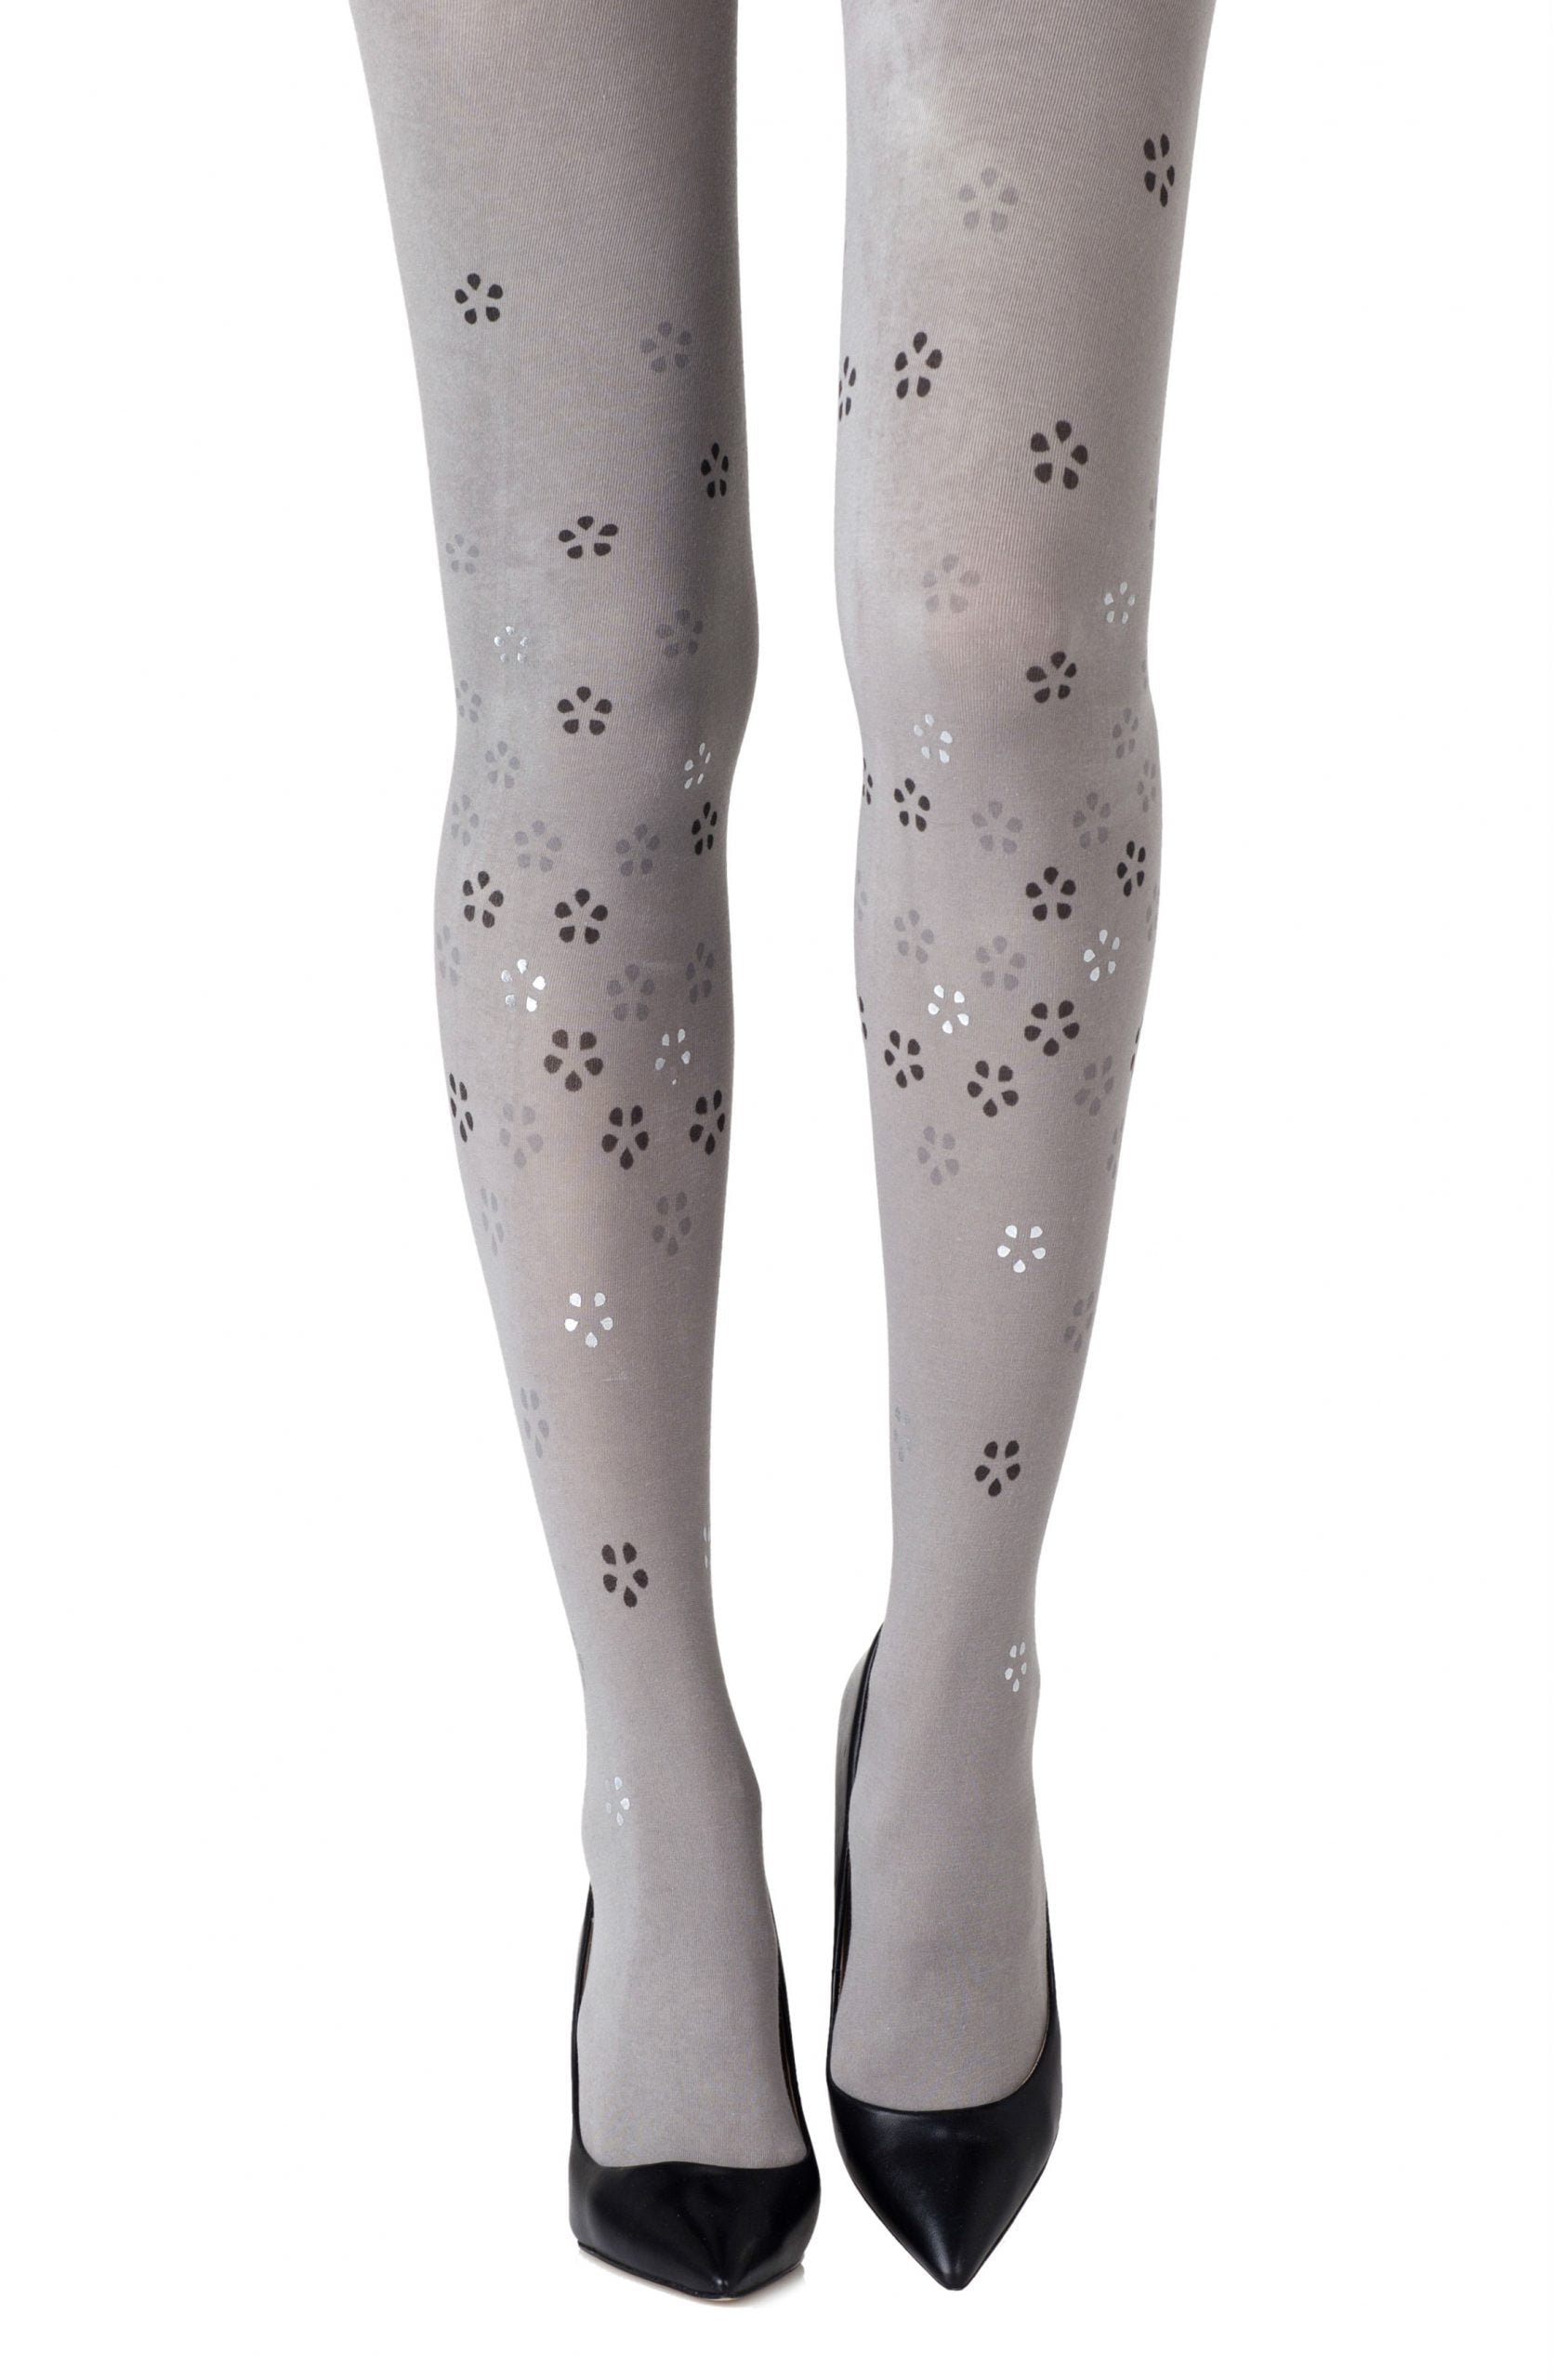 Vibrators, Sex Toy Kits and Sex Toys at Cloud9Adults - Zohara "Cherry Blossom Girl" Grey Tights - Buy Sex Toys Online